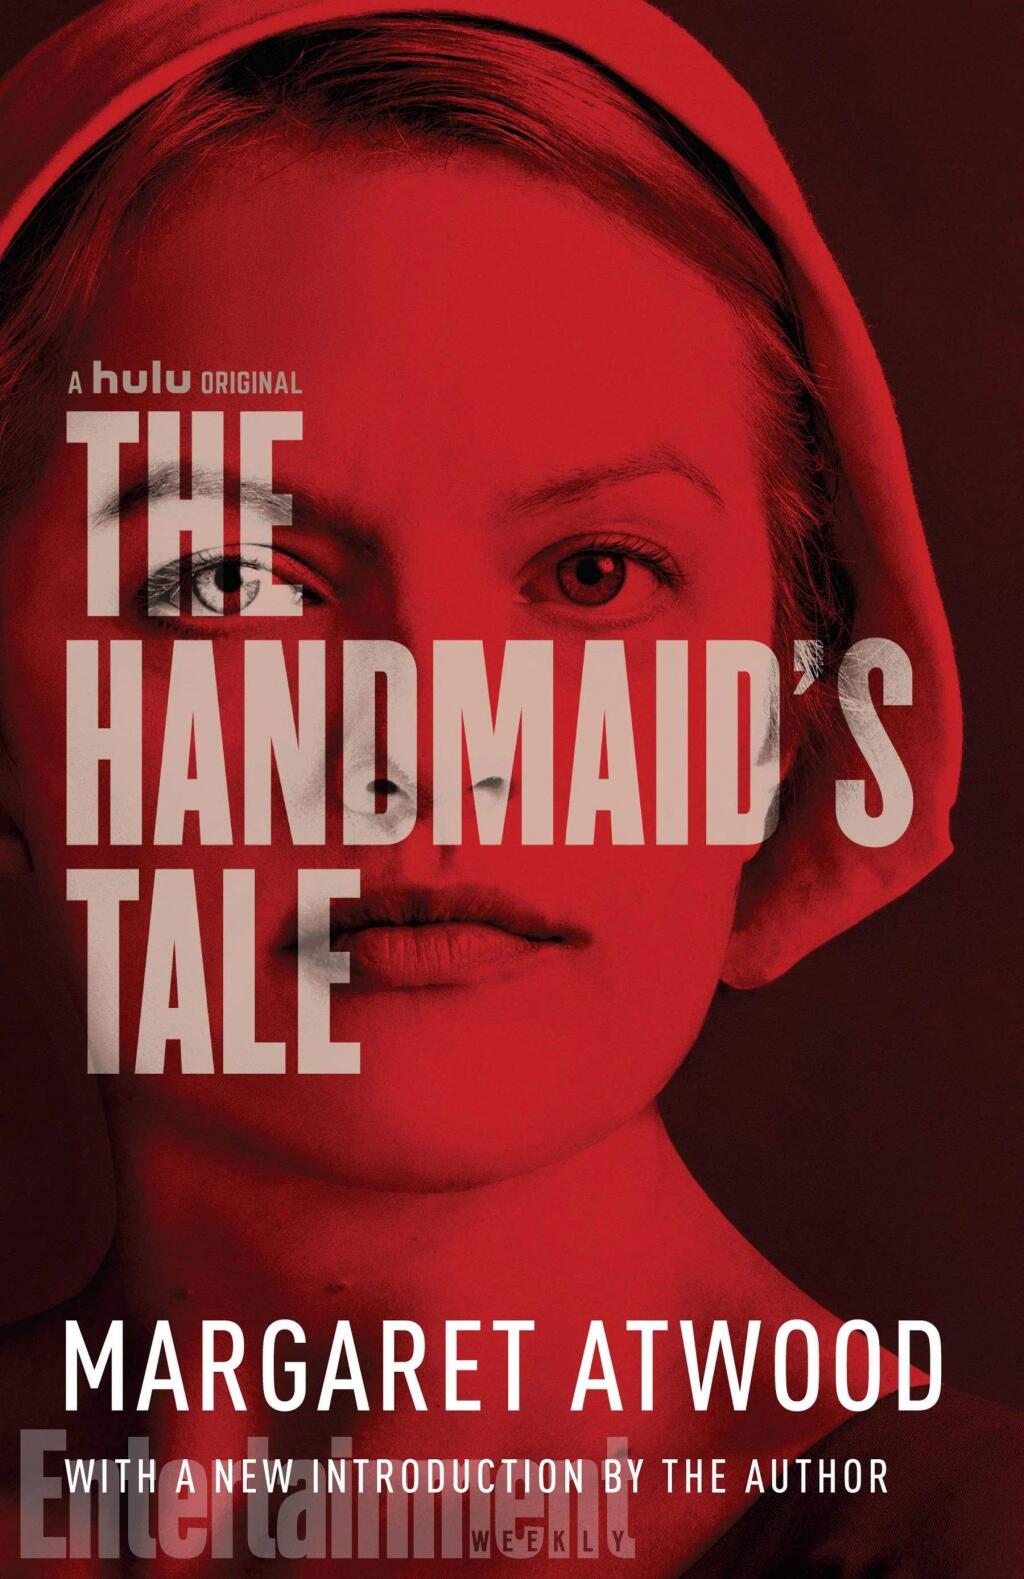 Margaret Atwood's 'The Handmaid's Tale' is the No. 9 bestselling book in Petaluma.